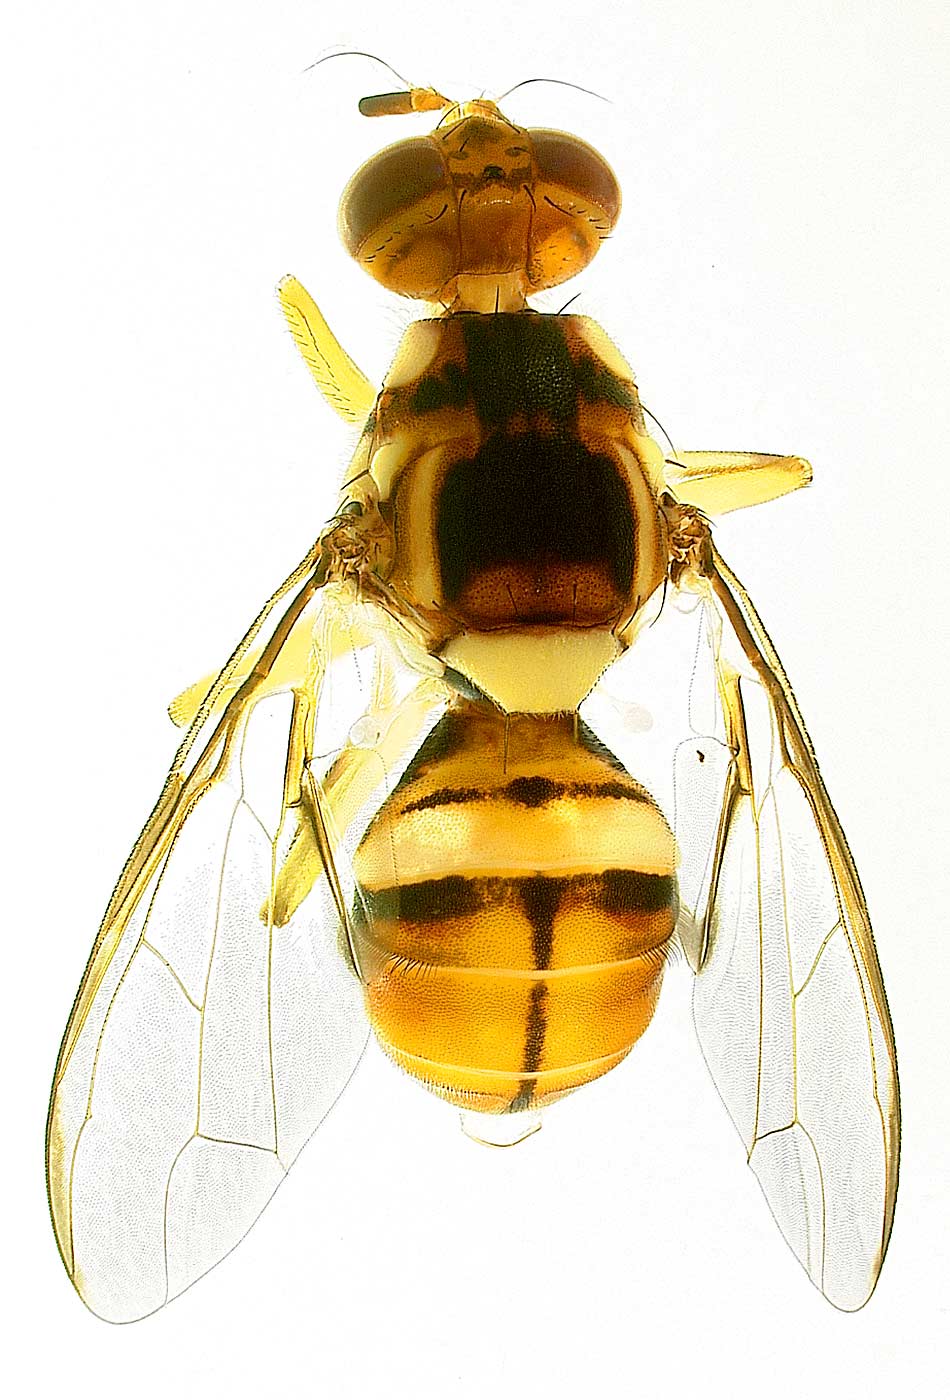 The oriental fruit fly (Bactrocera dorsalis), which is native to Asia, has hundreds of host plants, including peach, nectarine, apricot, pear and grape. Florida was able to eradicate it within a few months of the outbreak’s initial discovery. This fly was trapped in the field during the eradication effort. (Courtesy Gary Steck/Florida Department of Agriculture and Consumer Services)